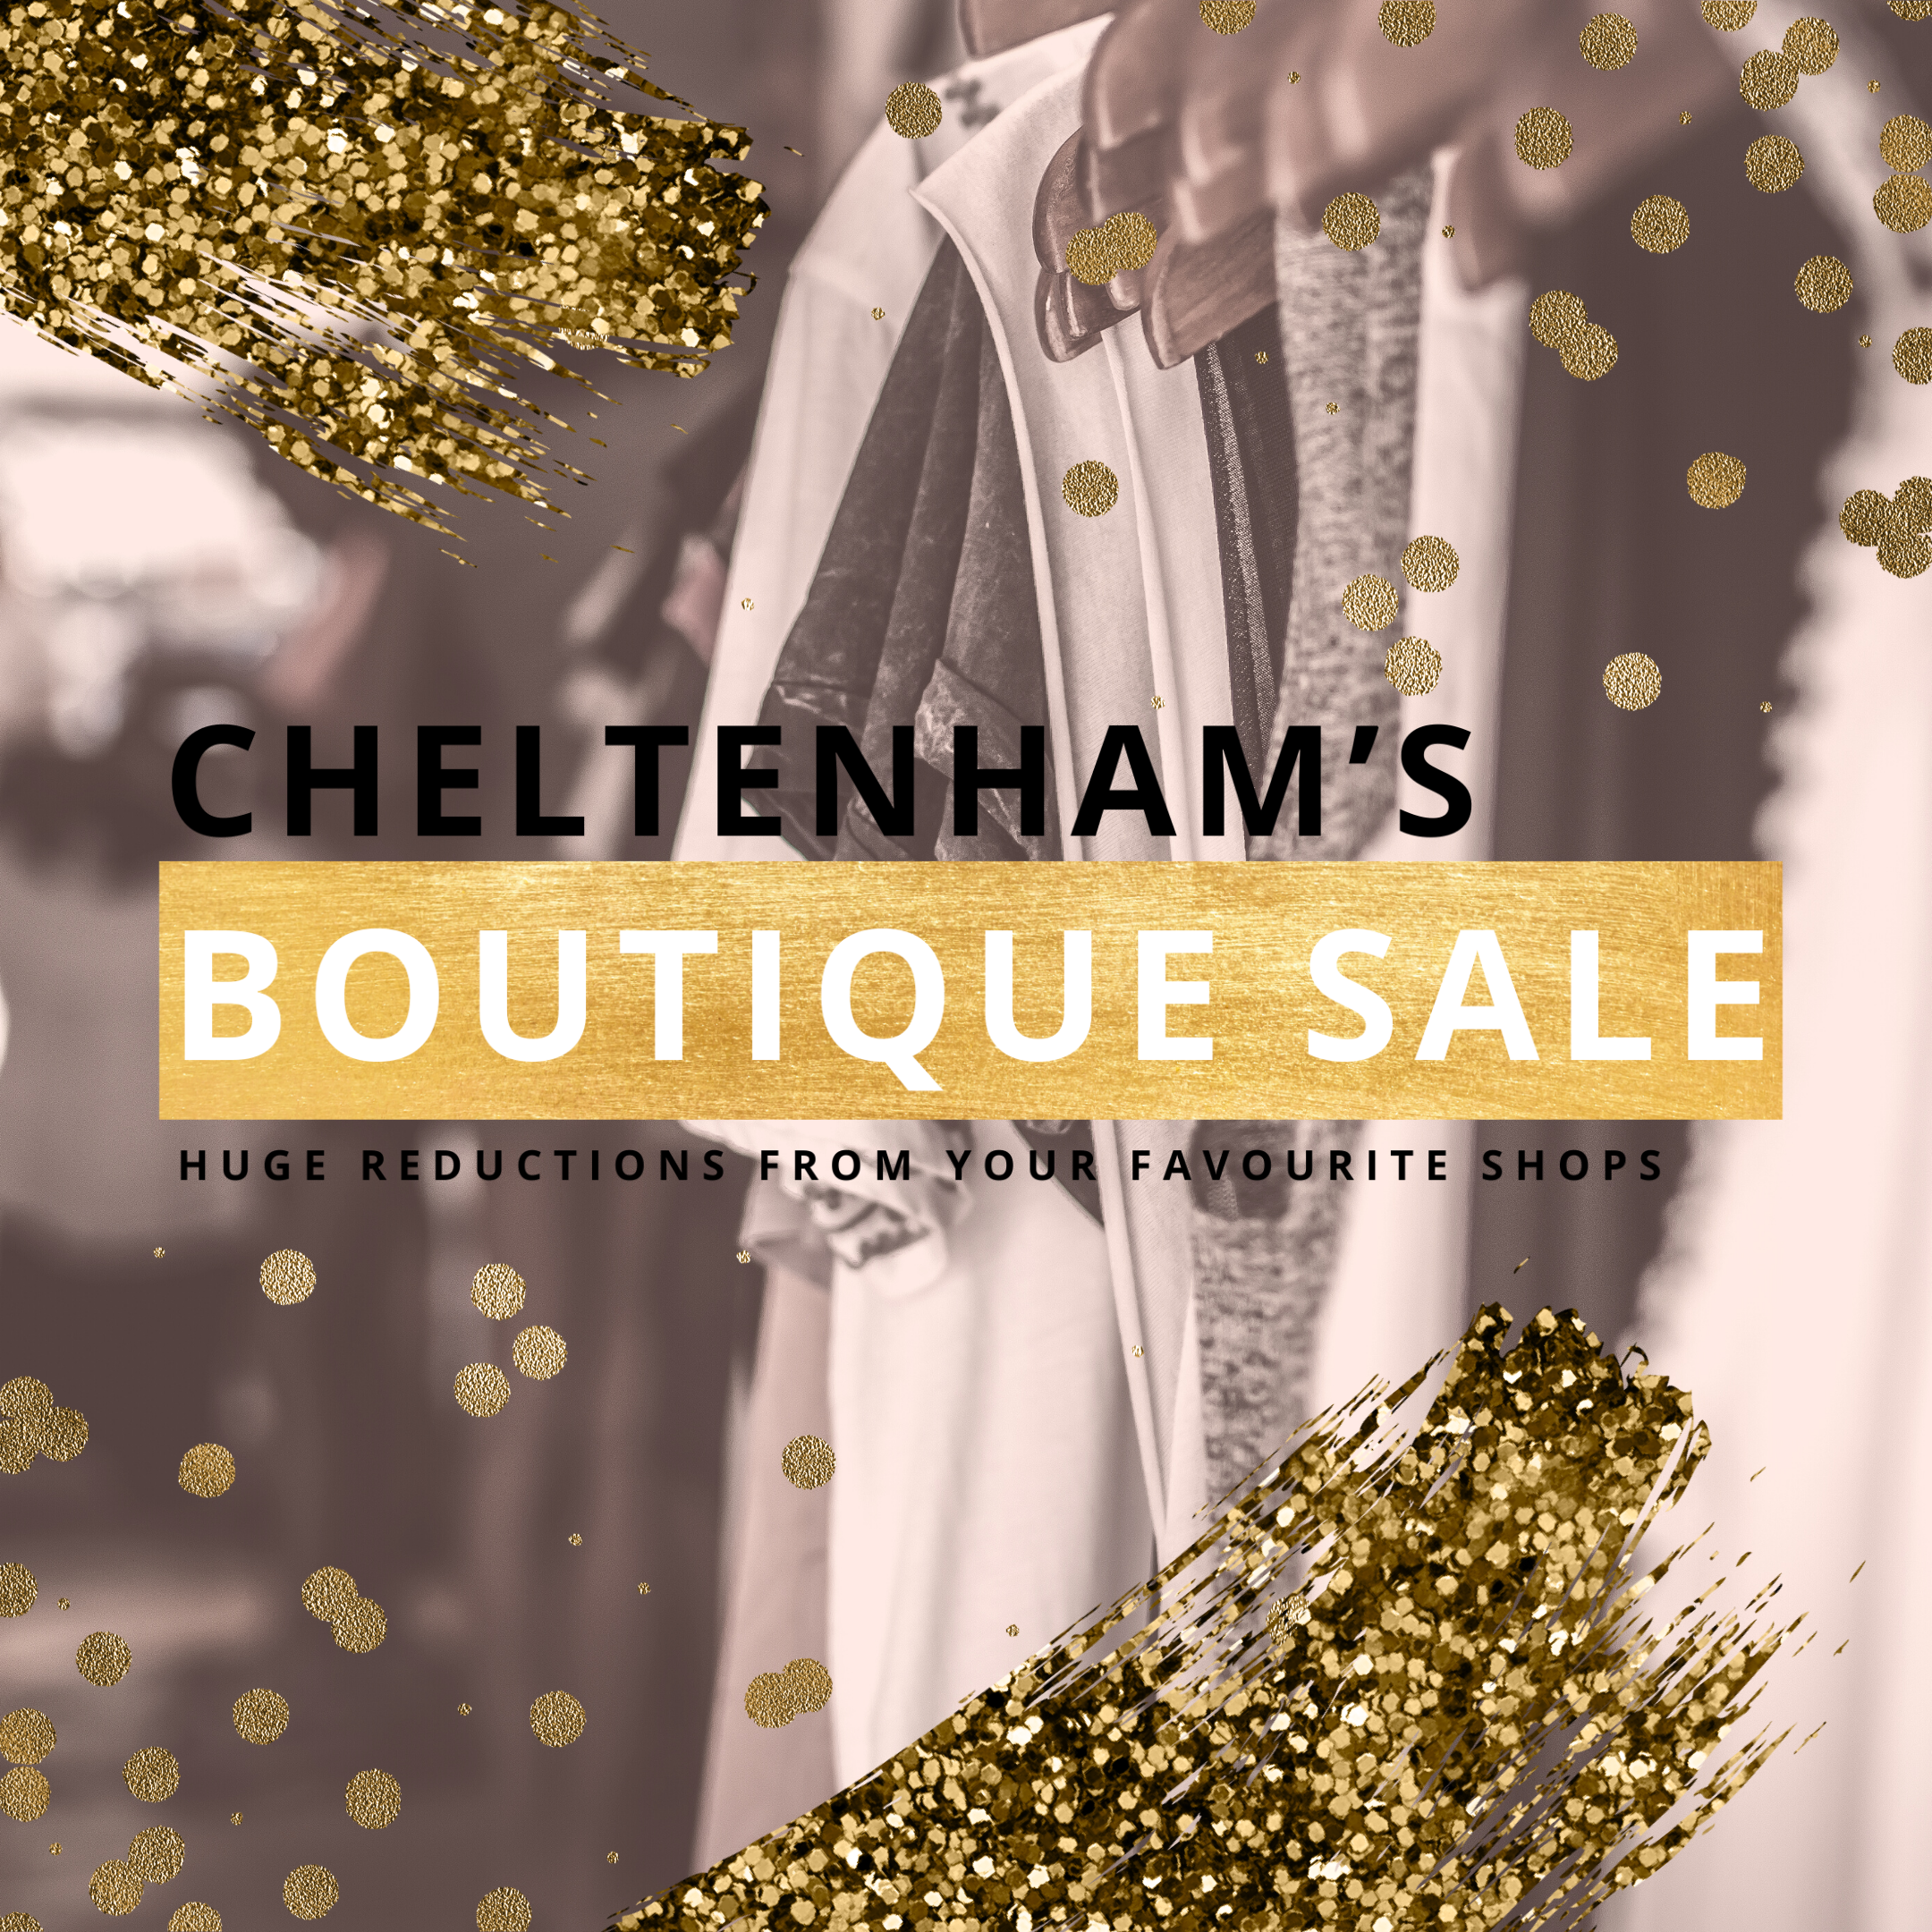 UP TO 70% OFF - The Cheltenham Boutique Sale returns...